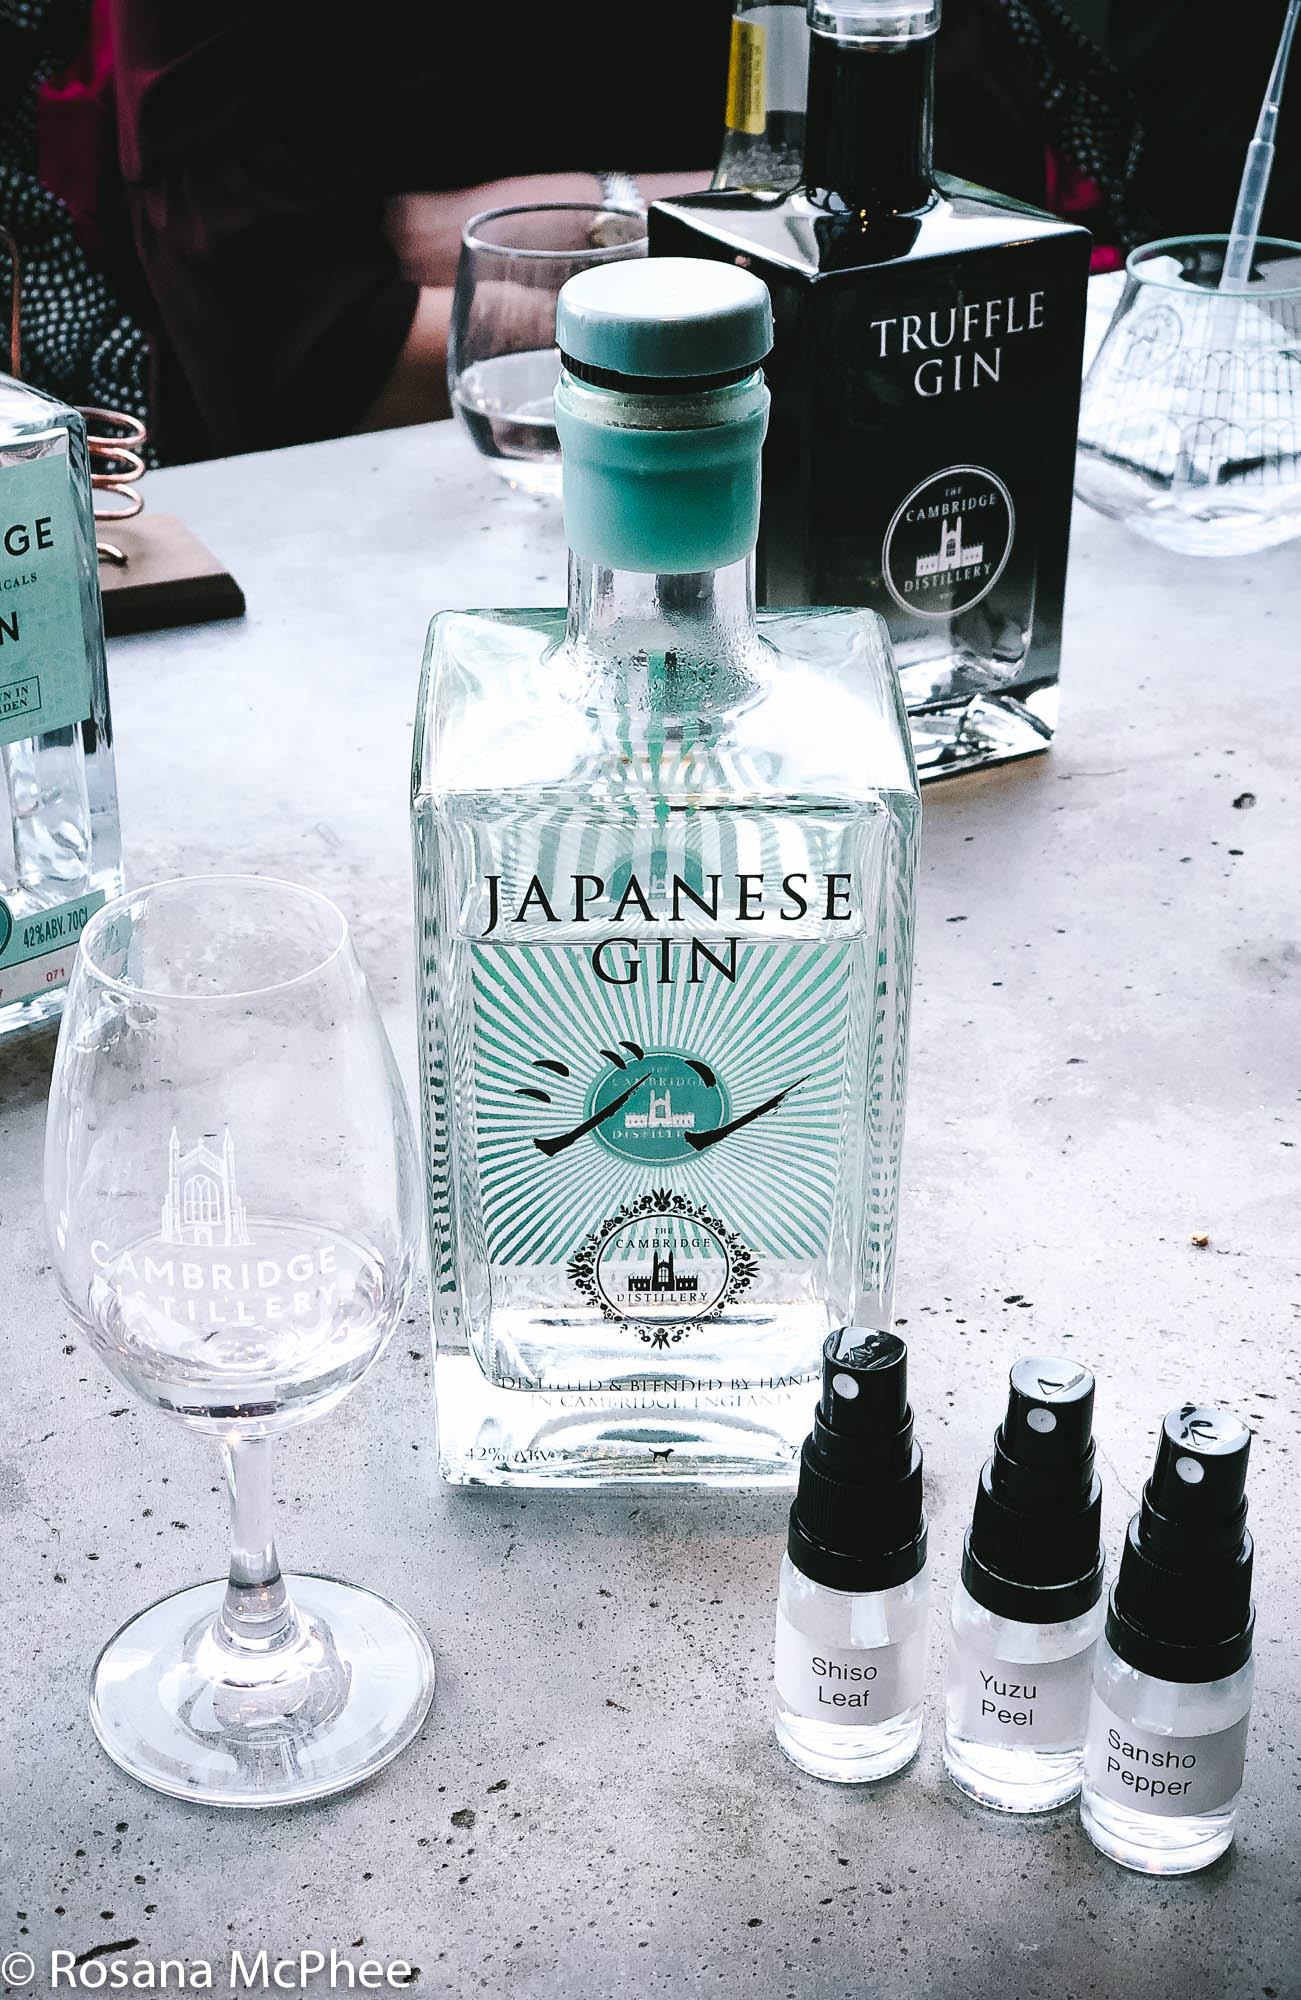 The Japanese Gin